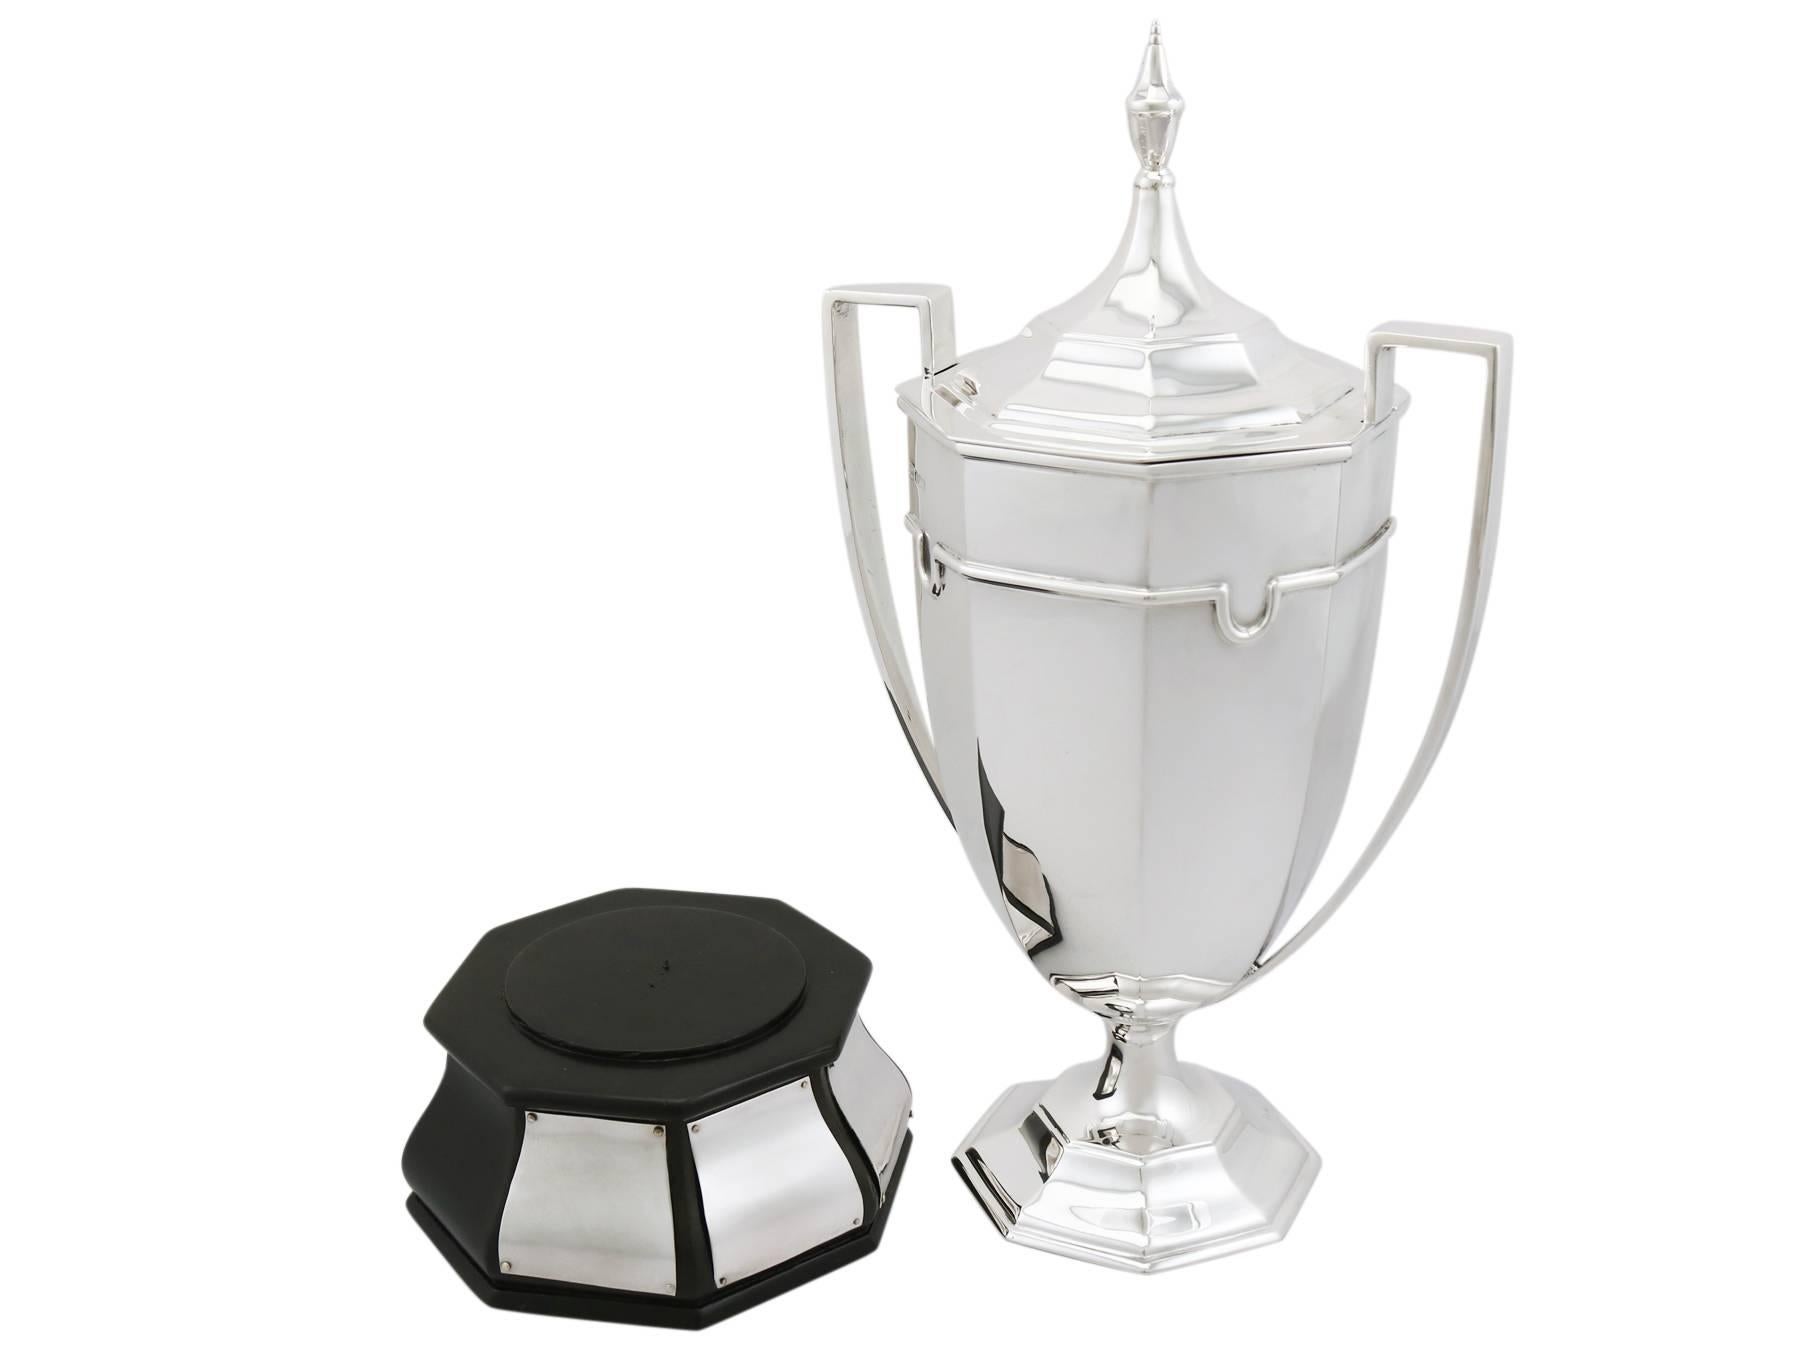 English Antique George V Sterling Silver Presentation Cup and Cover by Mappin & Webb Ltd